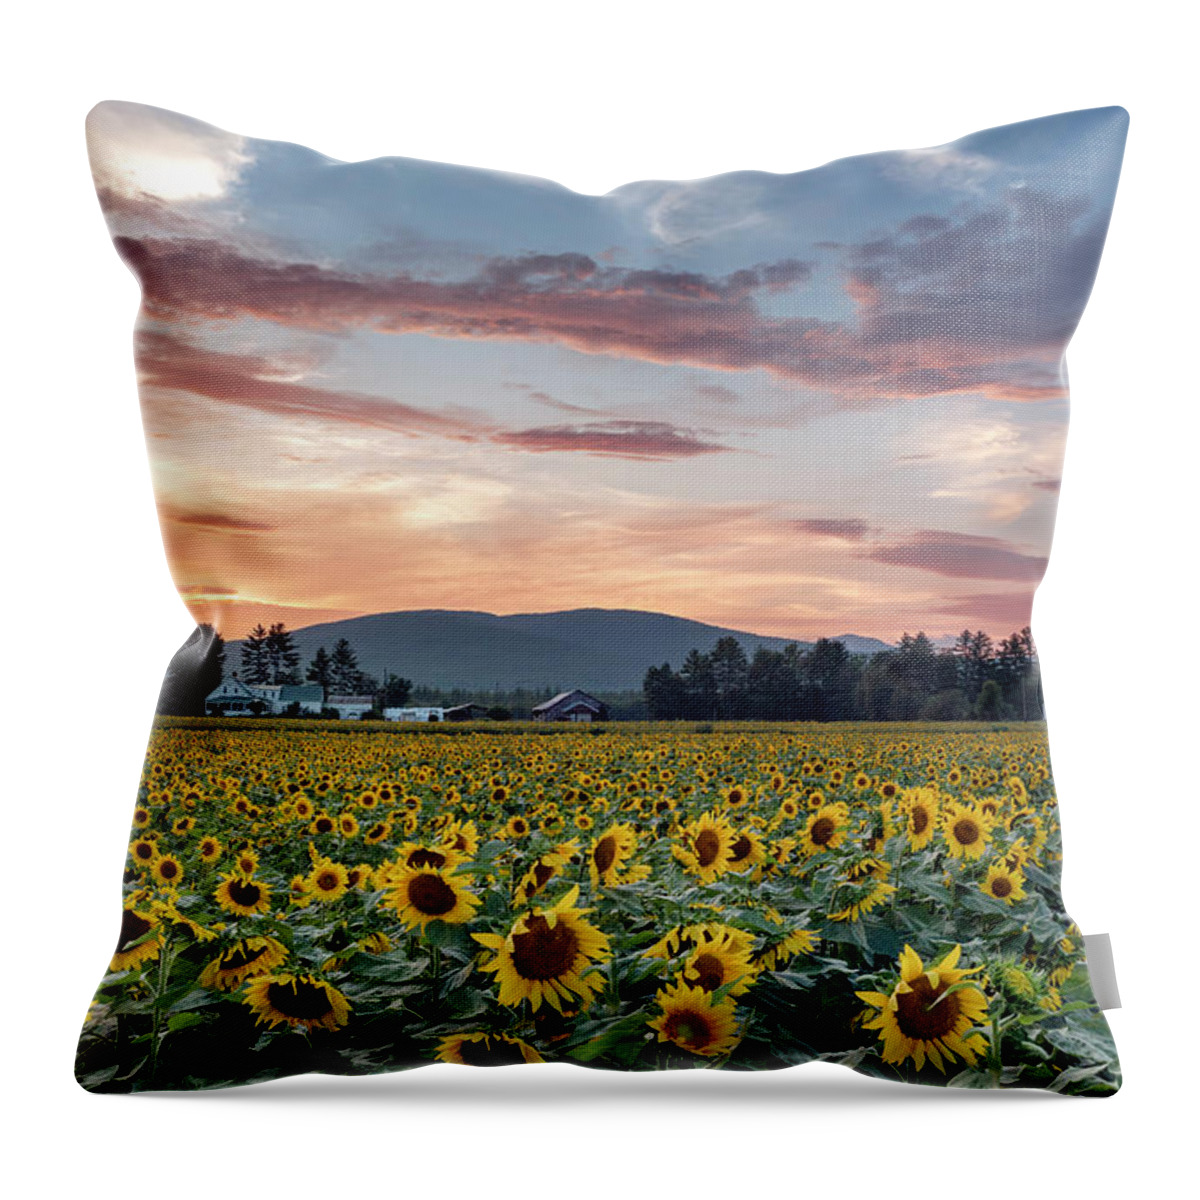 #sunflowers#summer#sunset#fryeburg#maine#farms#landscape#clouds# Throw Pillow featuring the photograph Sunflowers of Summer by Darylann Leonard Photography